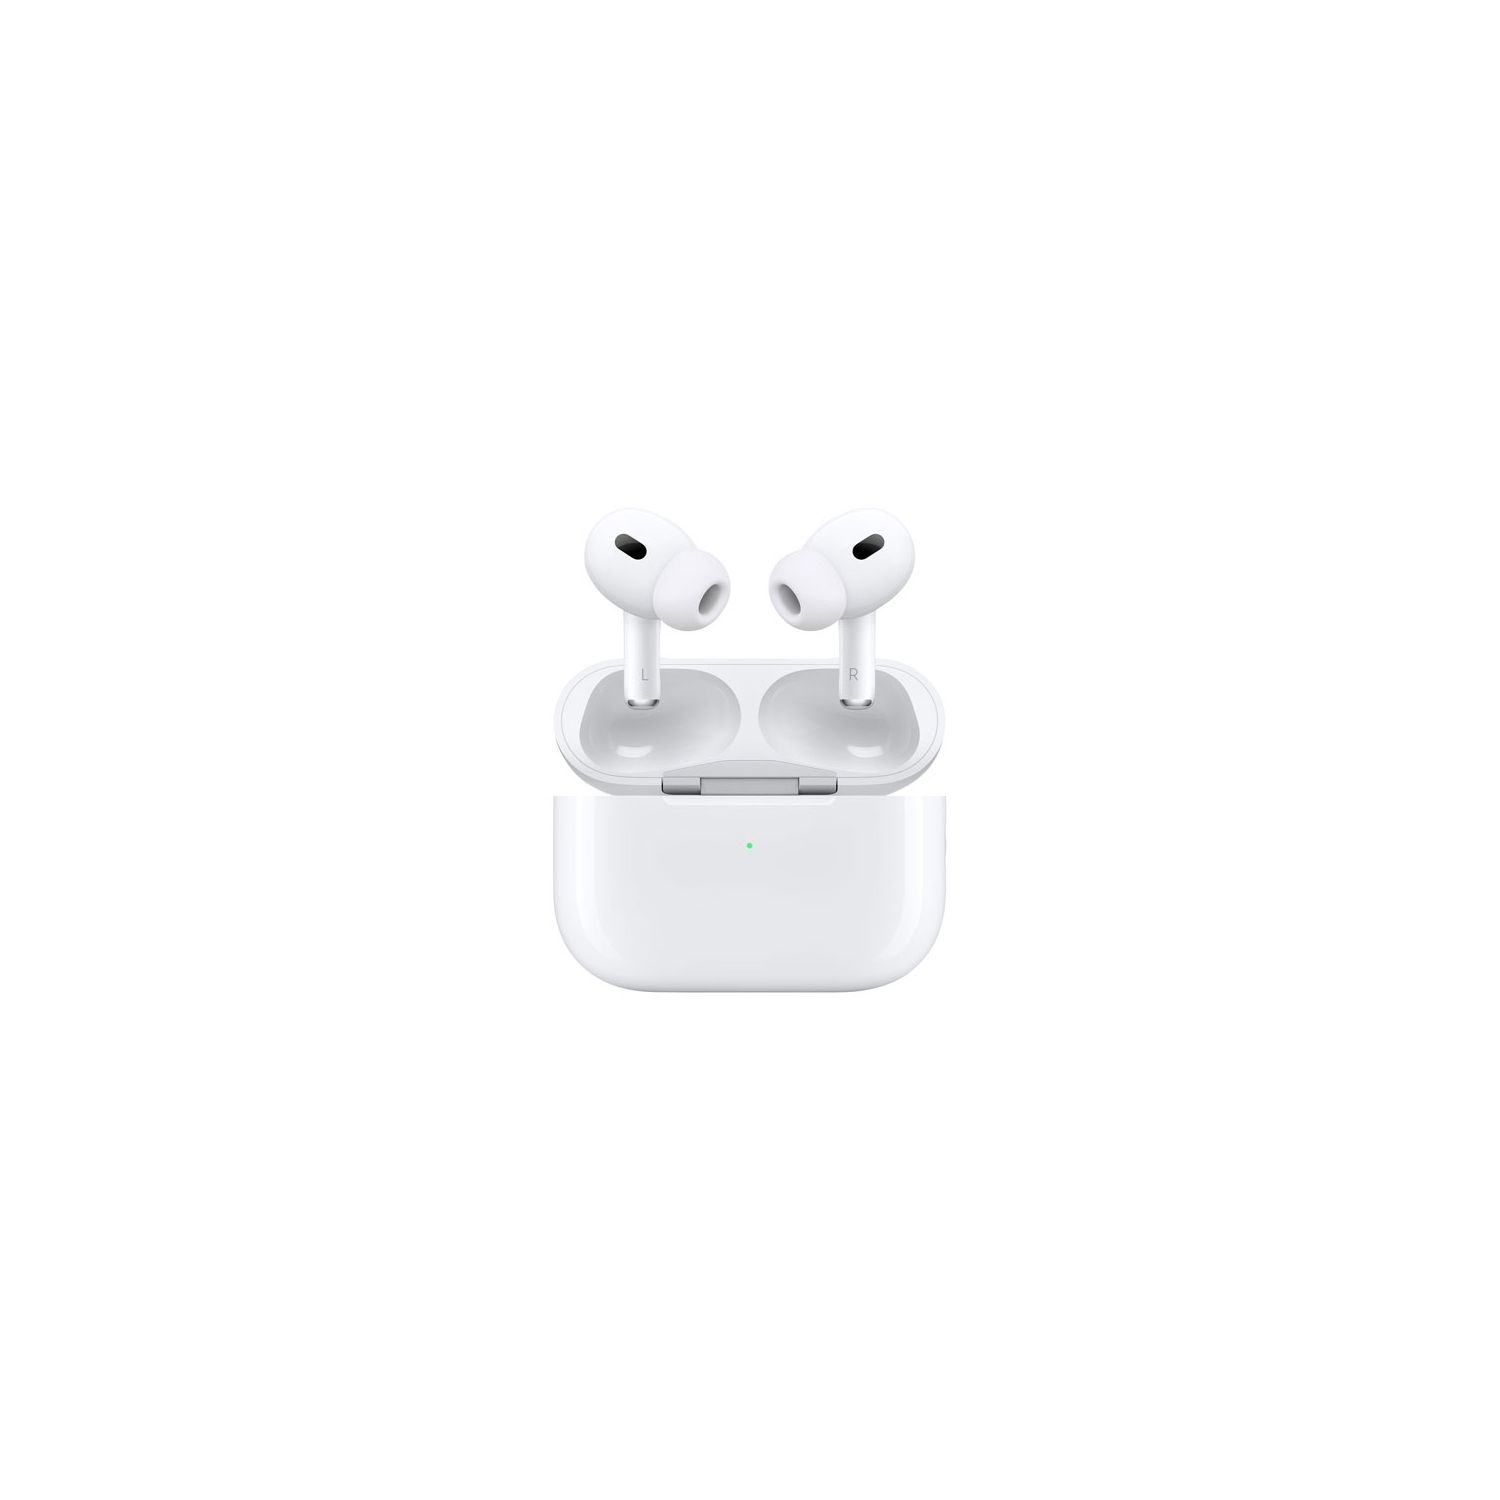 Refurbished (Fair) - Apple AirPods Pro (2nd generation) In-Ear Noise Cancelling Truly Wireless Headphones - White